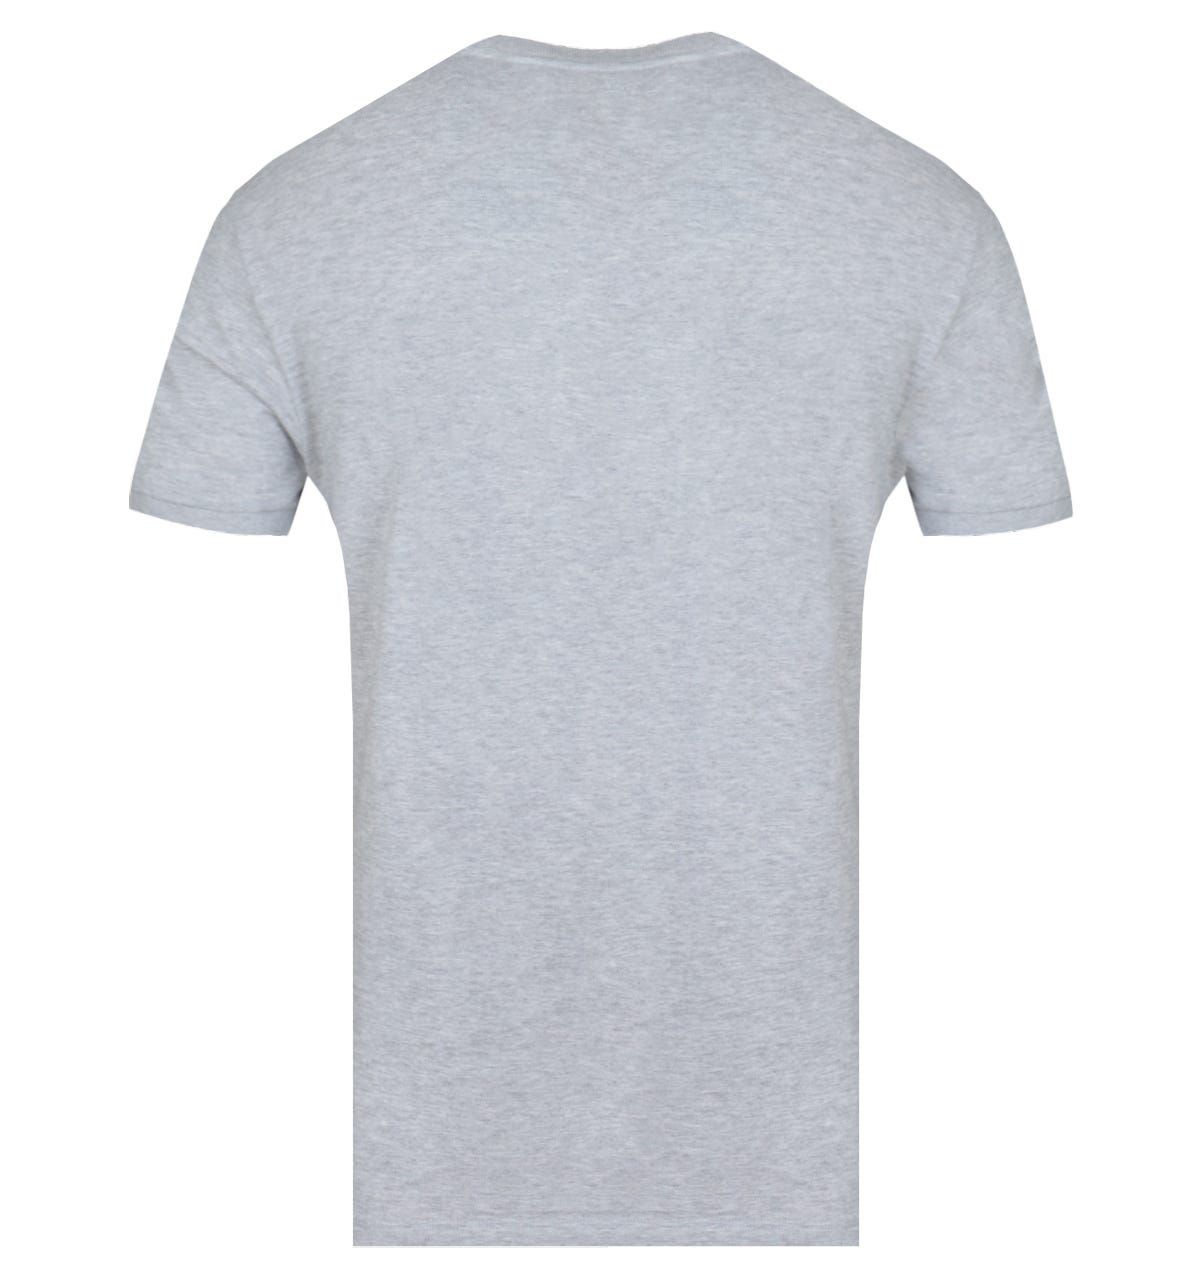 <p>A pure cotton composition crafted by Lacoste. The Lacoste Grey Homme T-Shirt is fitted with a crew neck cut with ribbed trims. The design is finished with the Lacoste logo embroidered on the chest.</p><ul><li>Cotton composition</li><li>Crew neck</li><li>Tonal stitching</li><li>Ribbed trims</li><li>Lacoste logo embroidered on chest</li></ul><p>Style & Fit:</p><ul><li>Regular fit</li><li>Fits true to size</li></ul><p>Fabric Composition & Care:</p><ul><li>100% Cotton</li><li>Machine washable</li></ul>